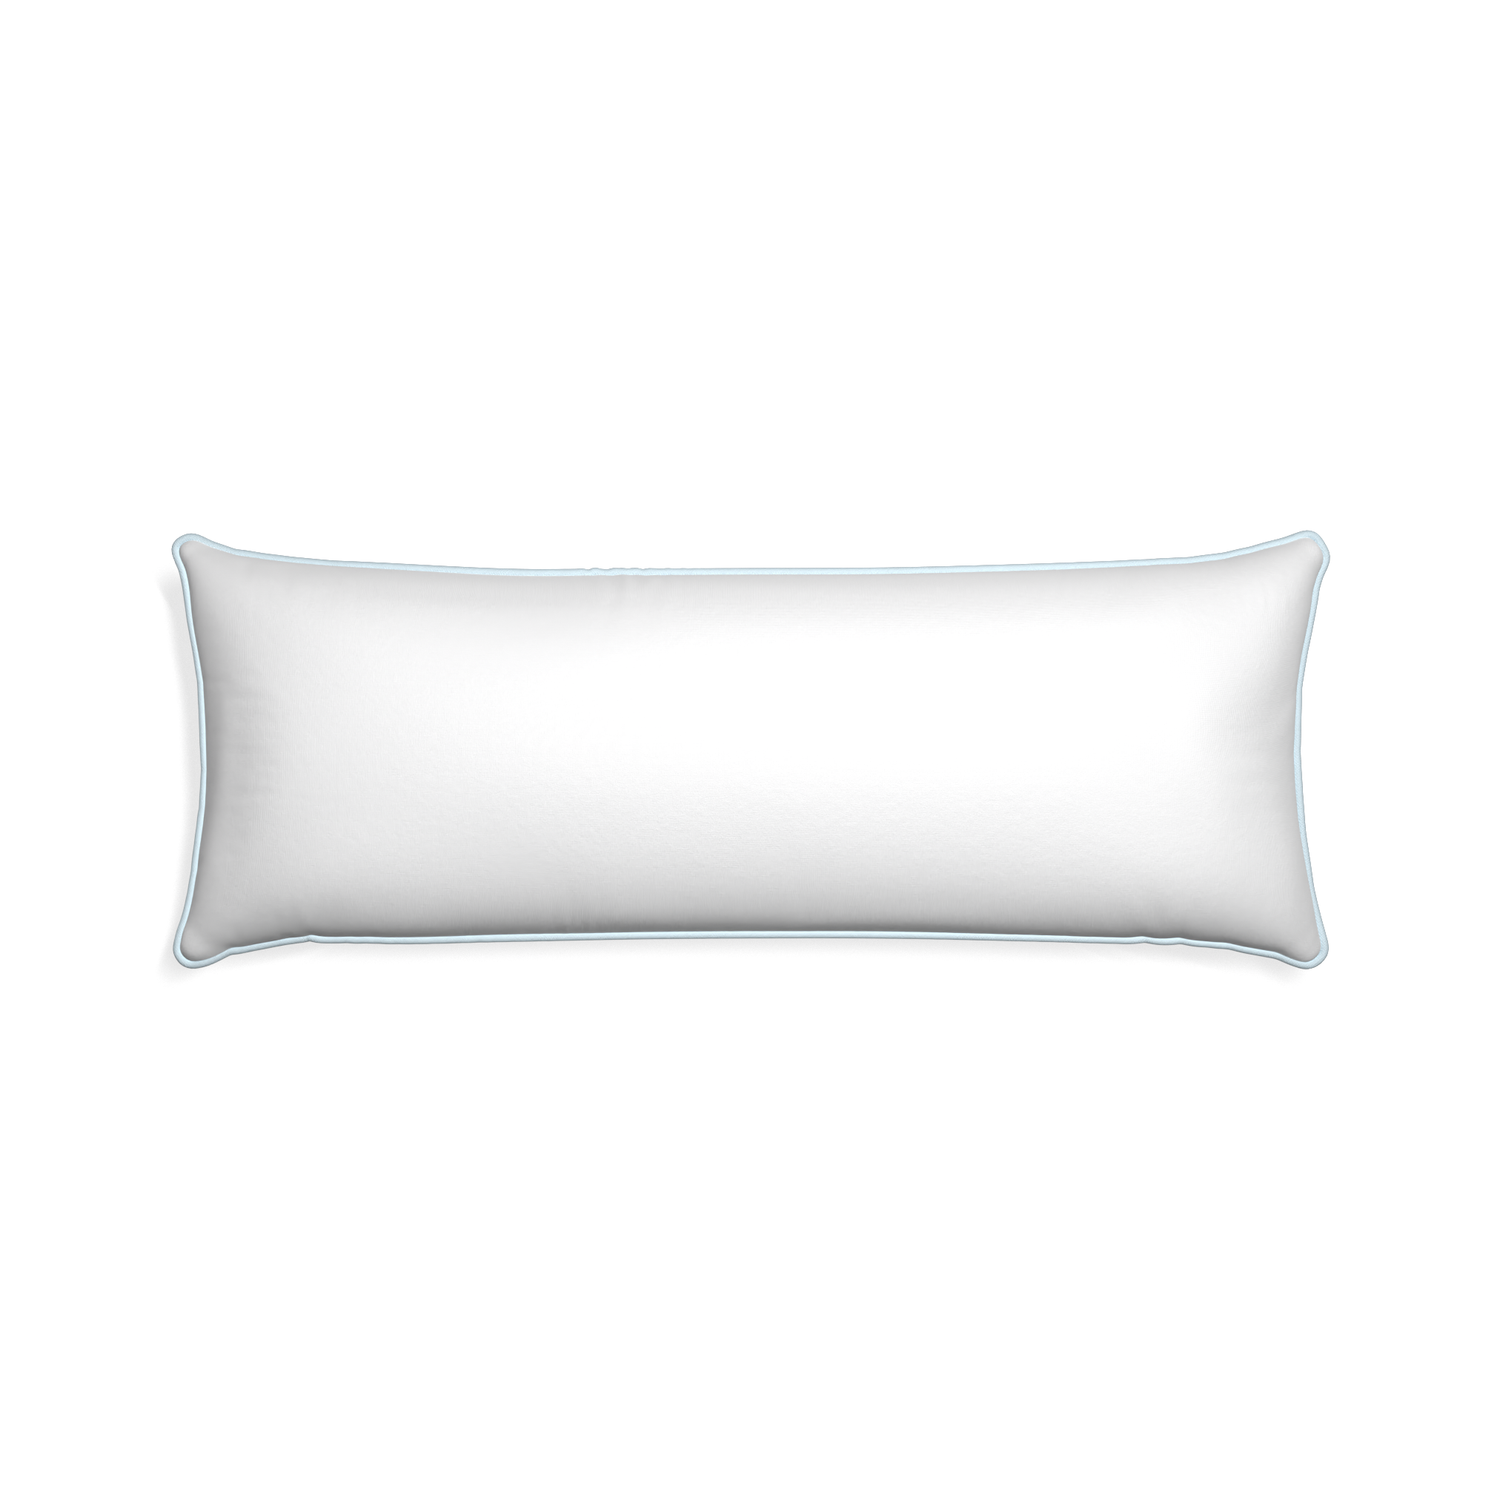 Xl-lumbar snow custom pillow with powder piping on white background